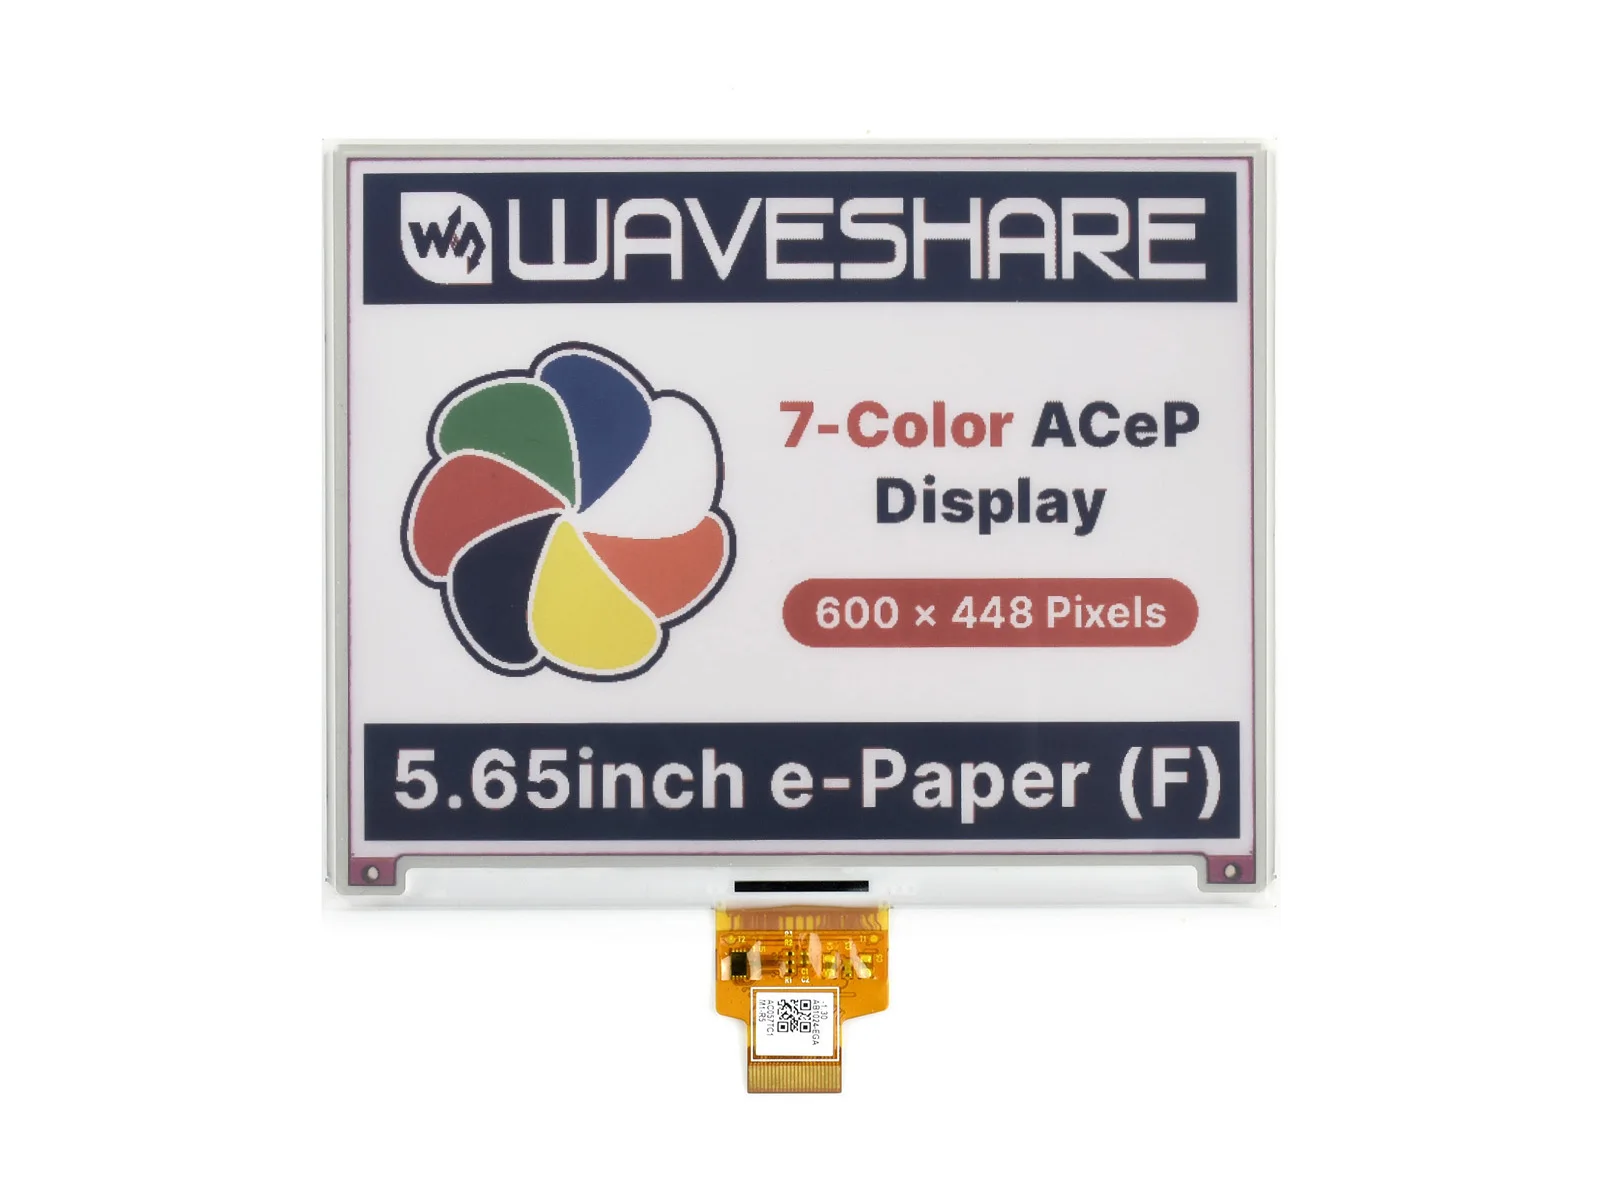 Waveshare 5.65inch Colorful E-Paper E-Ink Raw Display, 600×448 Pixels, ACeP 7-Color, Without PCB